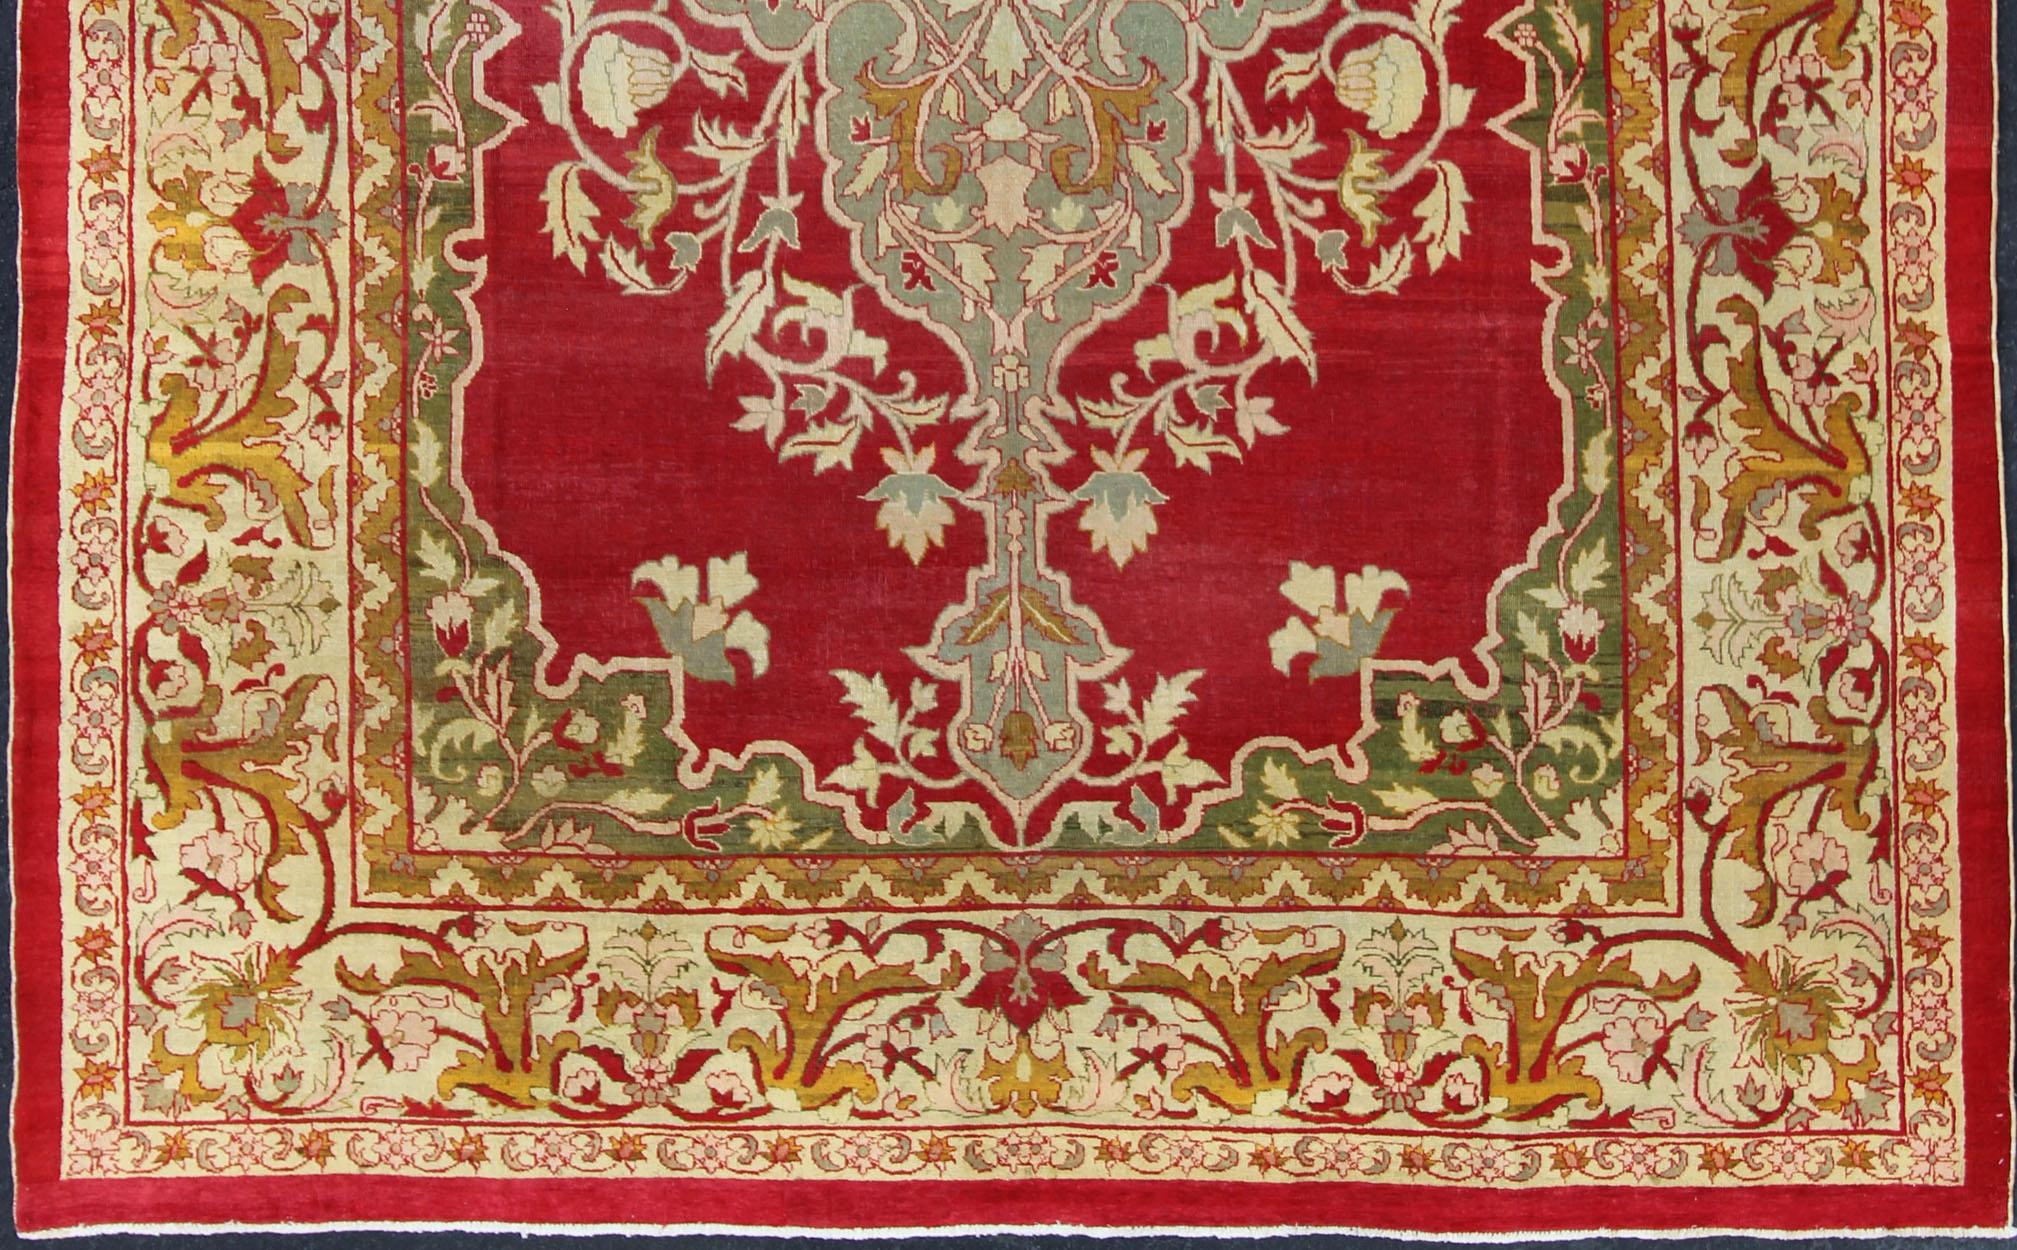       Indian Agra Antique Rug with Center Medallion in Green, Red, and Gold Colors. Keivan Woven Arts / 11-90208, circa 1910, Early 20-th Century Indian Agra

This outstanding Agra rug from the late 19th Century, with its bold design and color